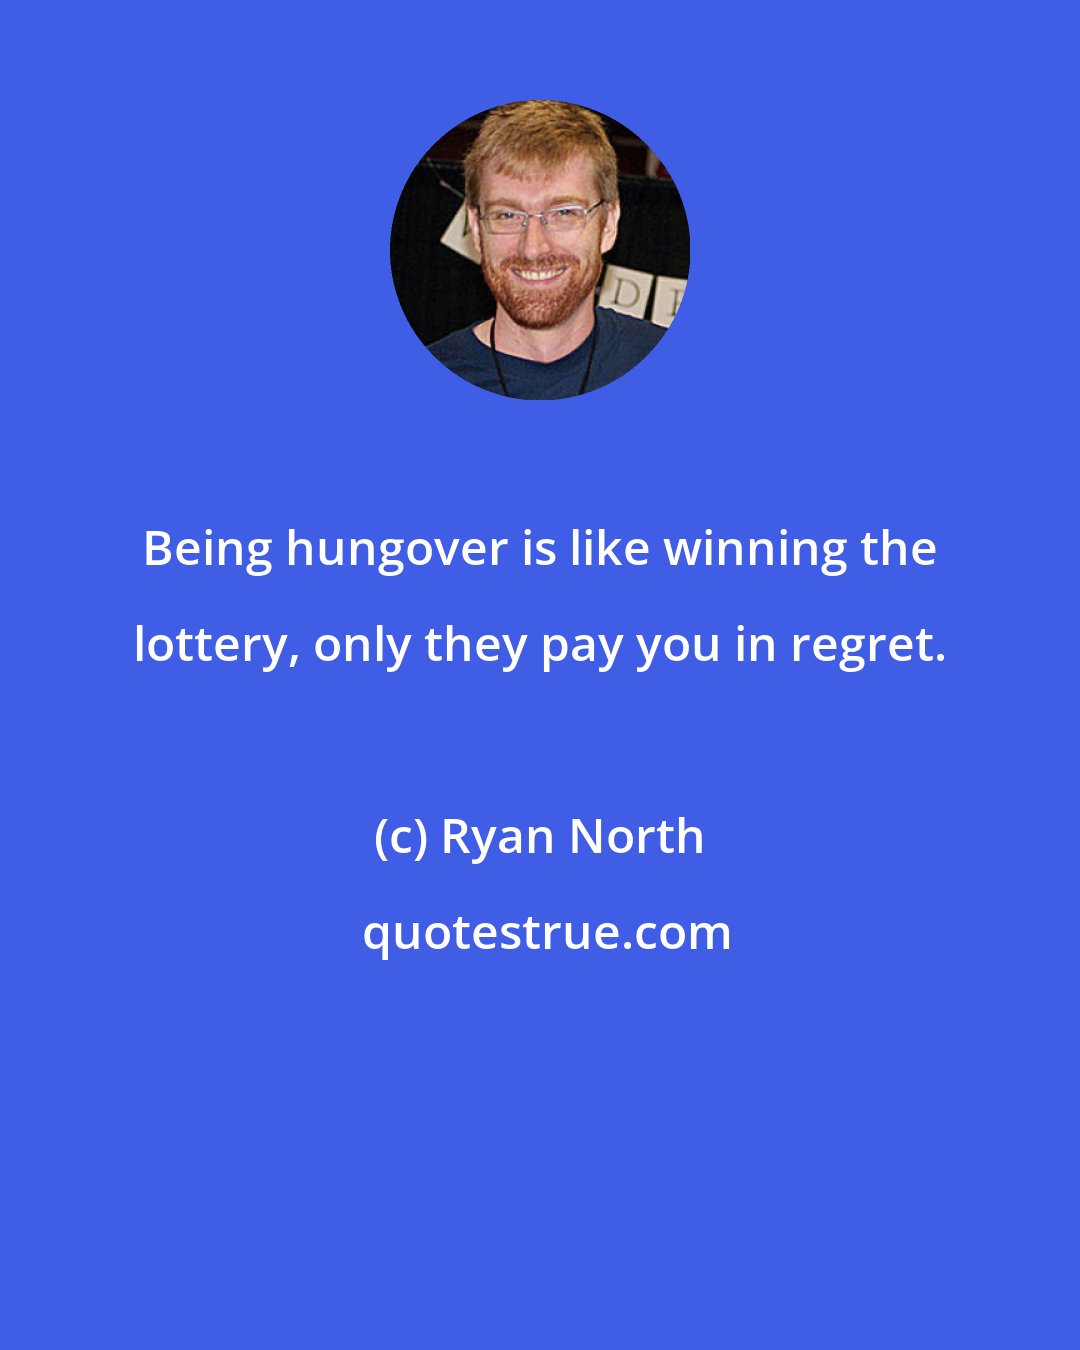 Ryan North: Being hungover is like winning the lottery, only they pay you in regret.